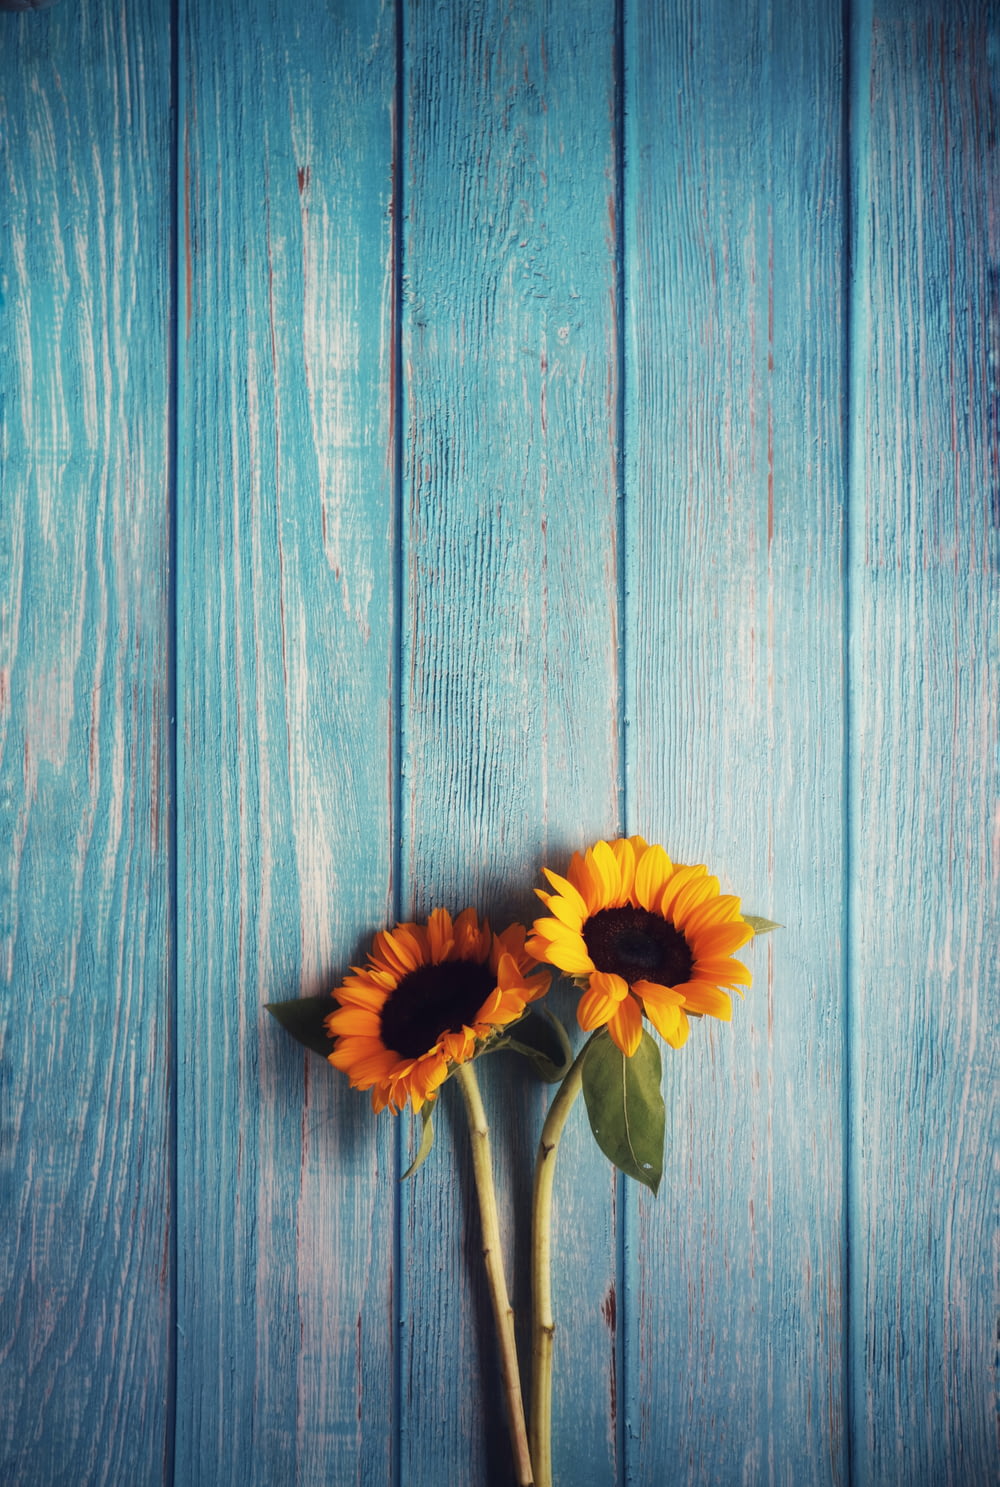 two yellow sunflowers on gray wooden surface